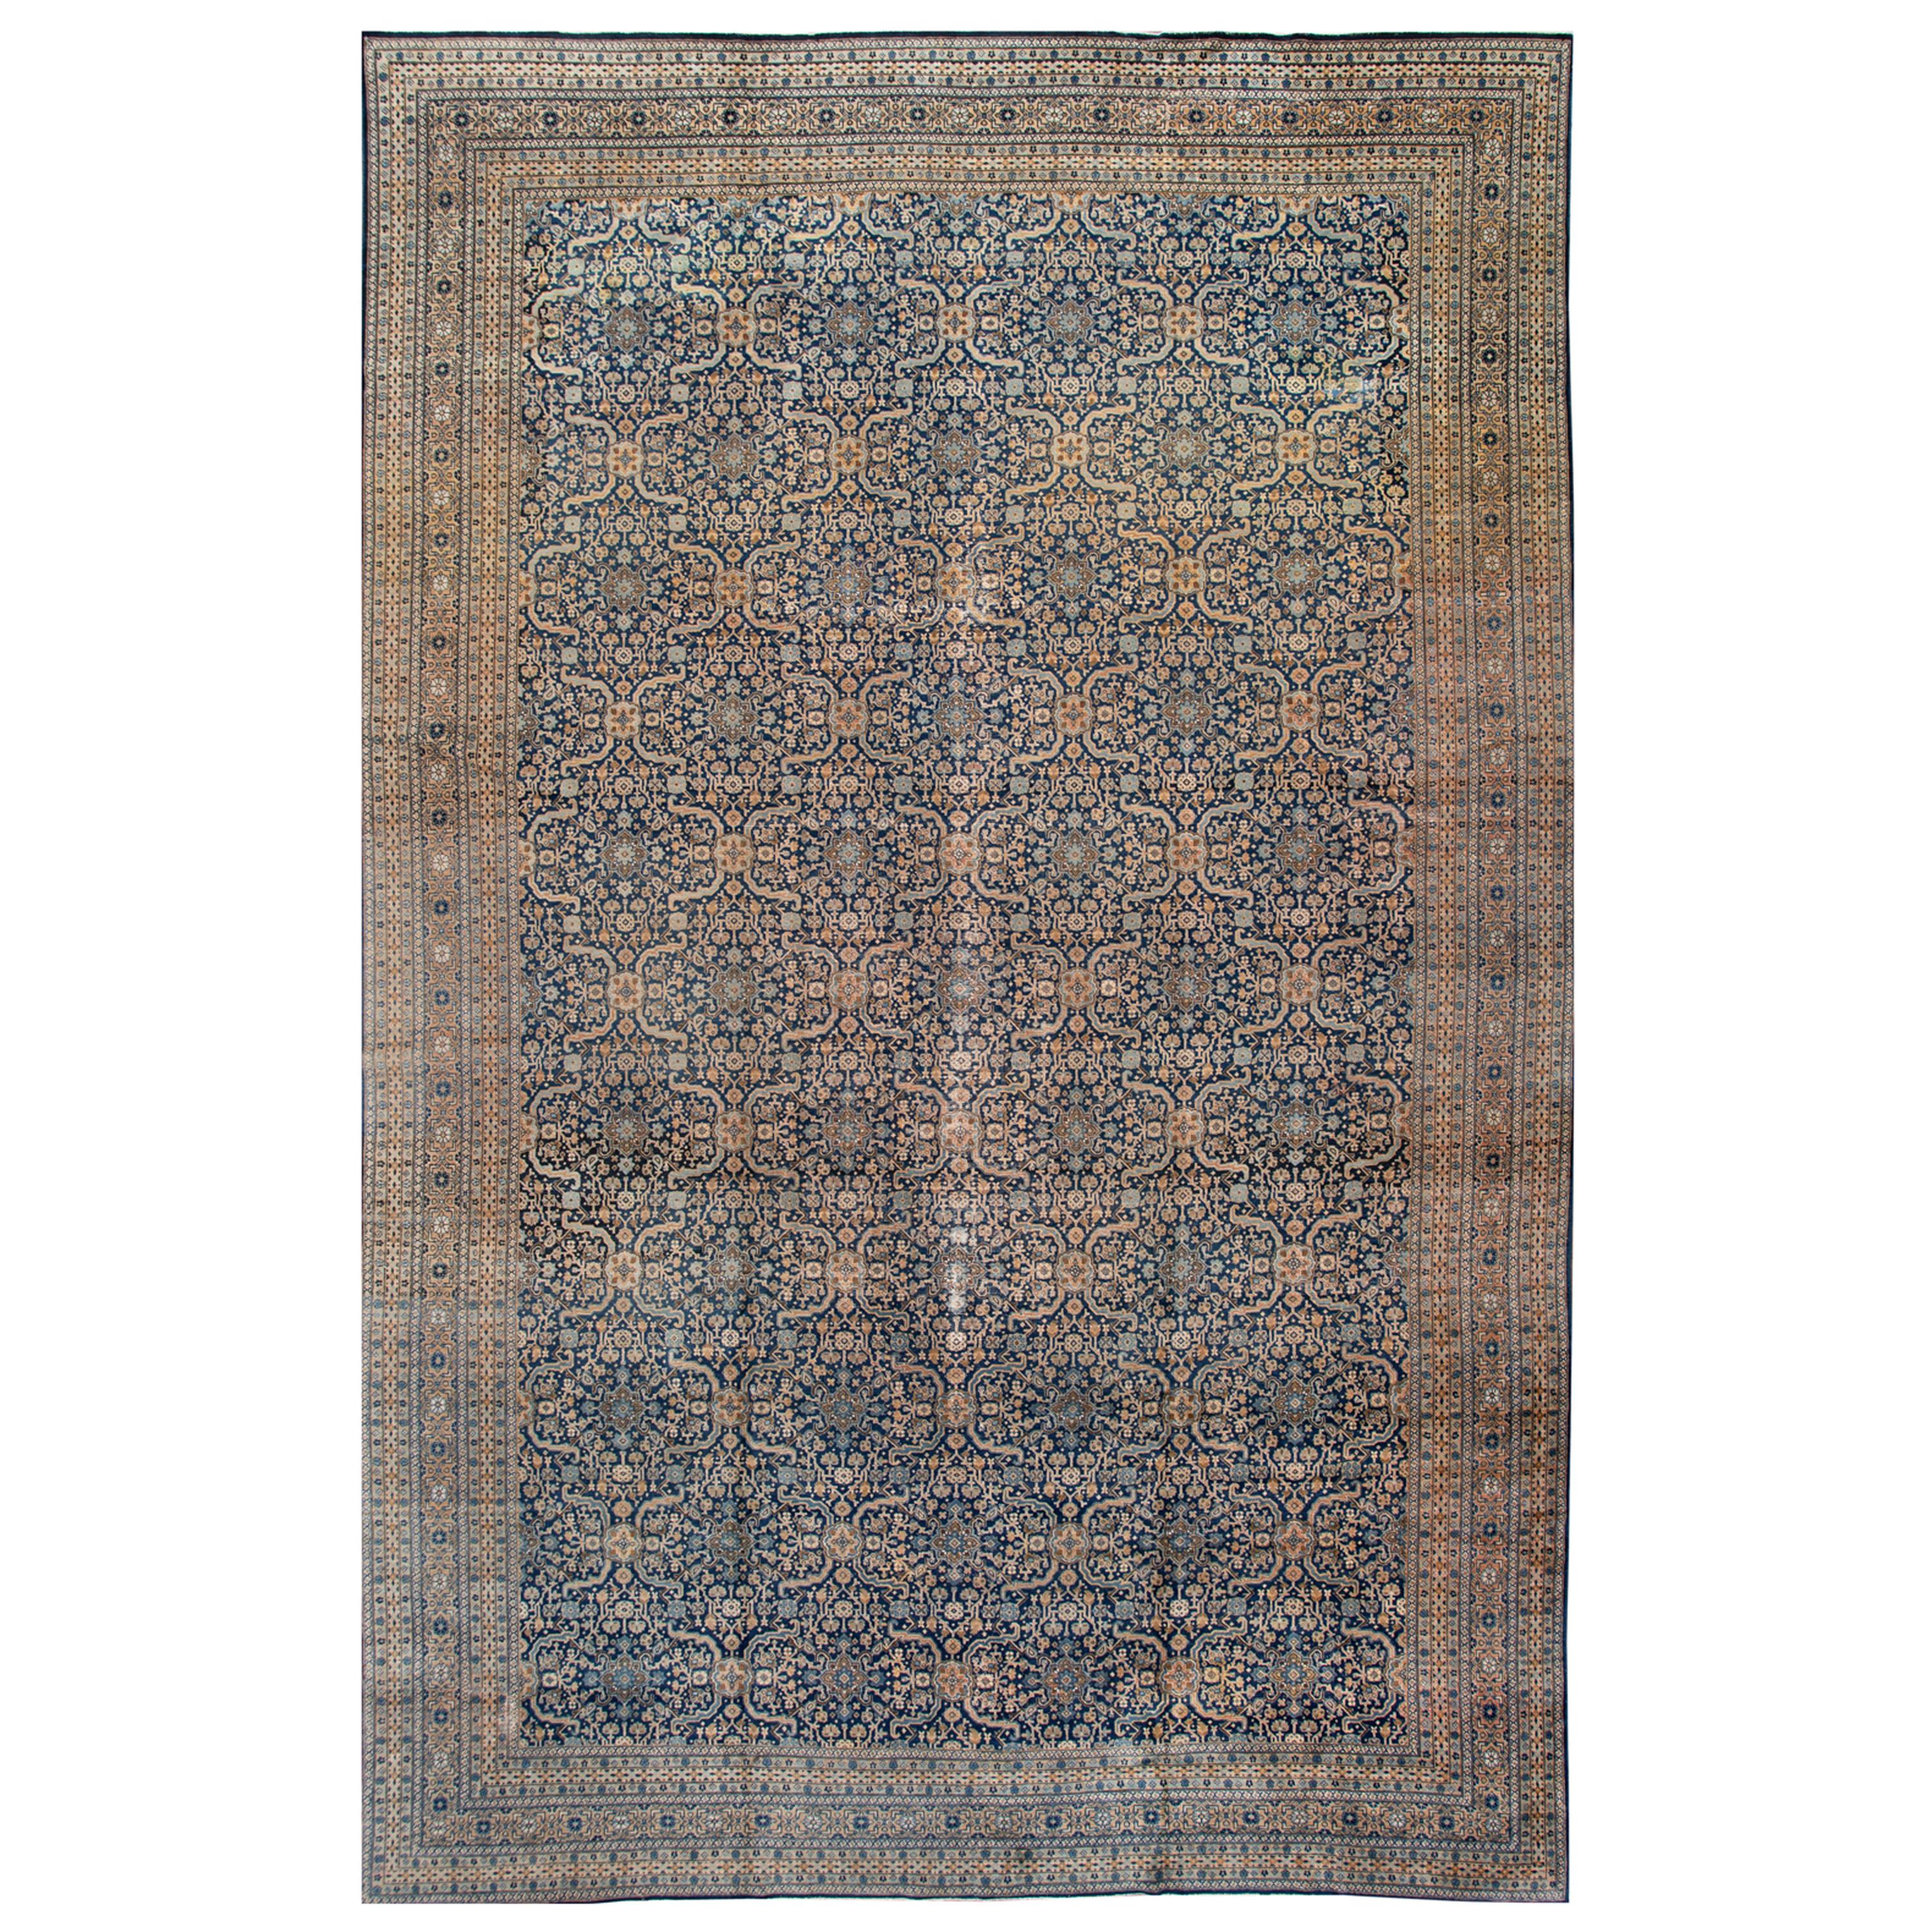 Early 20th Century Antique Tabriz Oversize Wool Rug